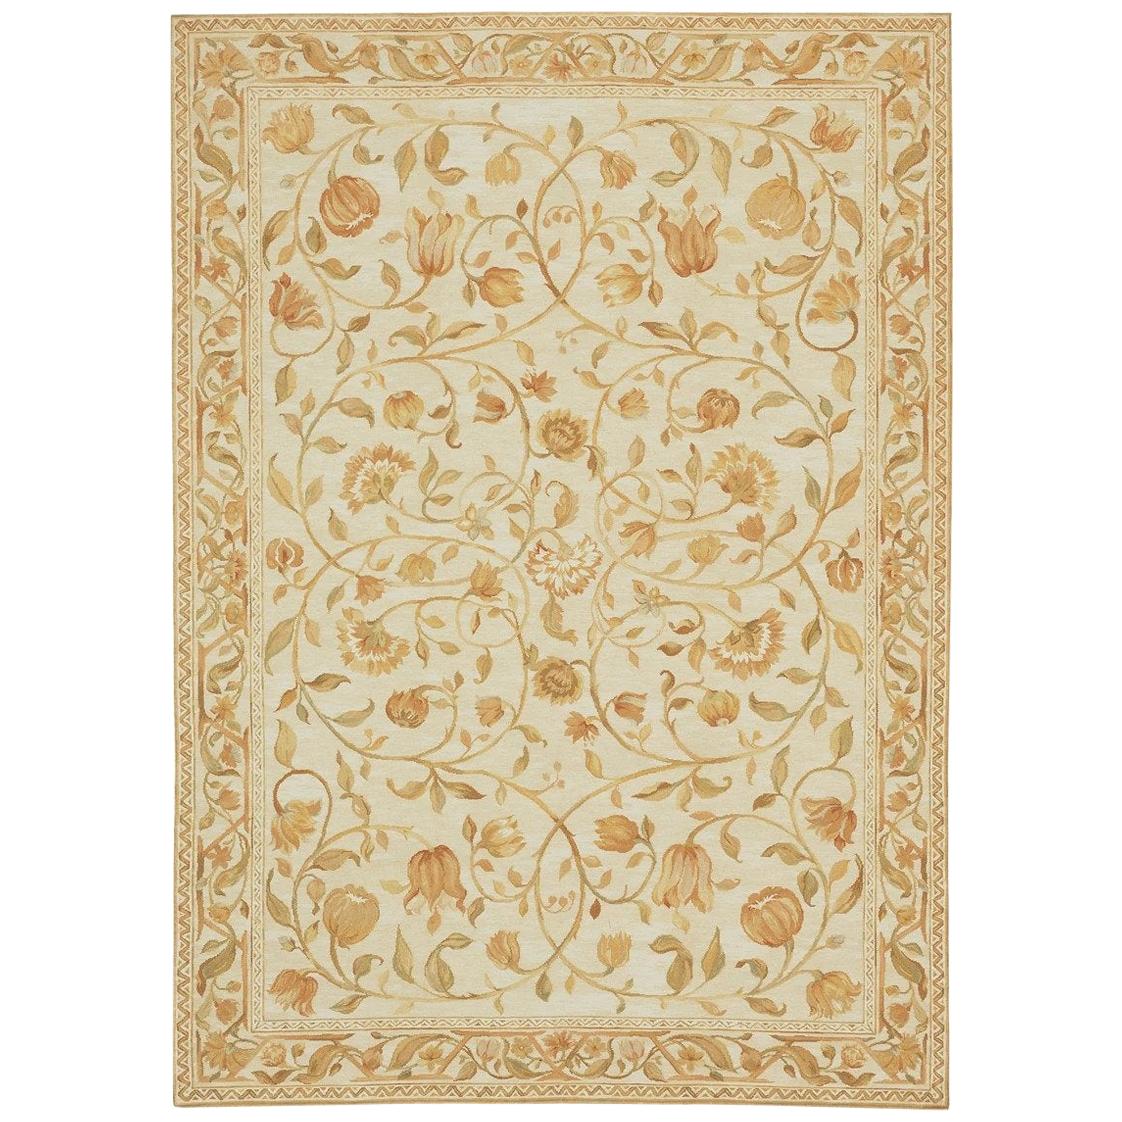  Luxury Savonnerie Wool Ivory / Ivory Area Rug 7'11"x9'10" For Sale